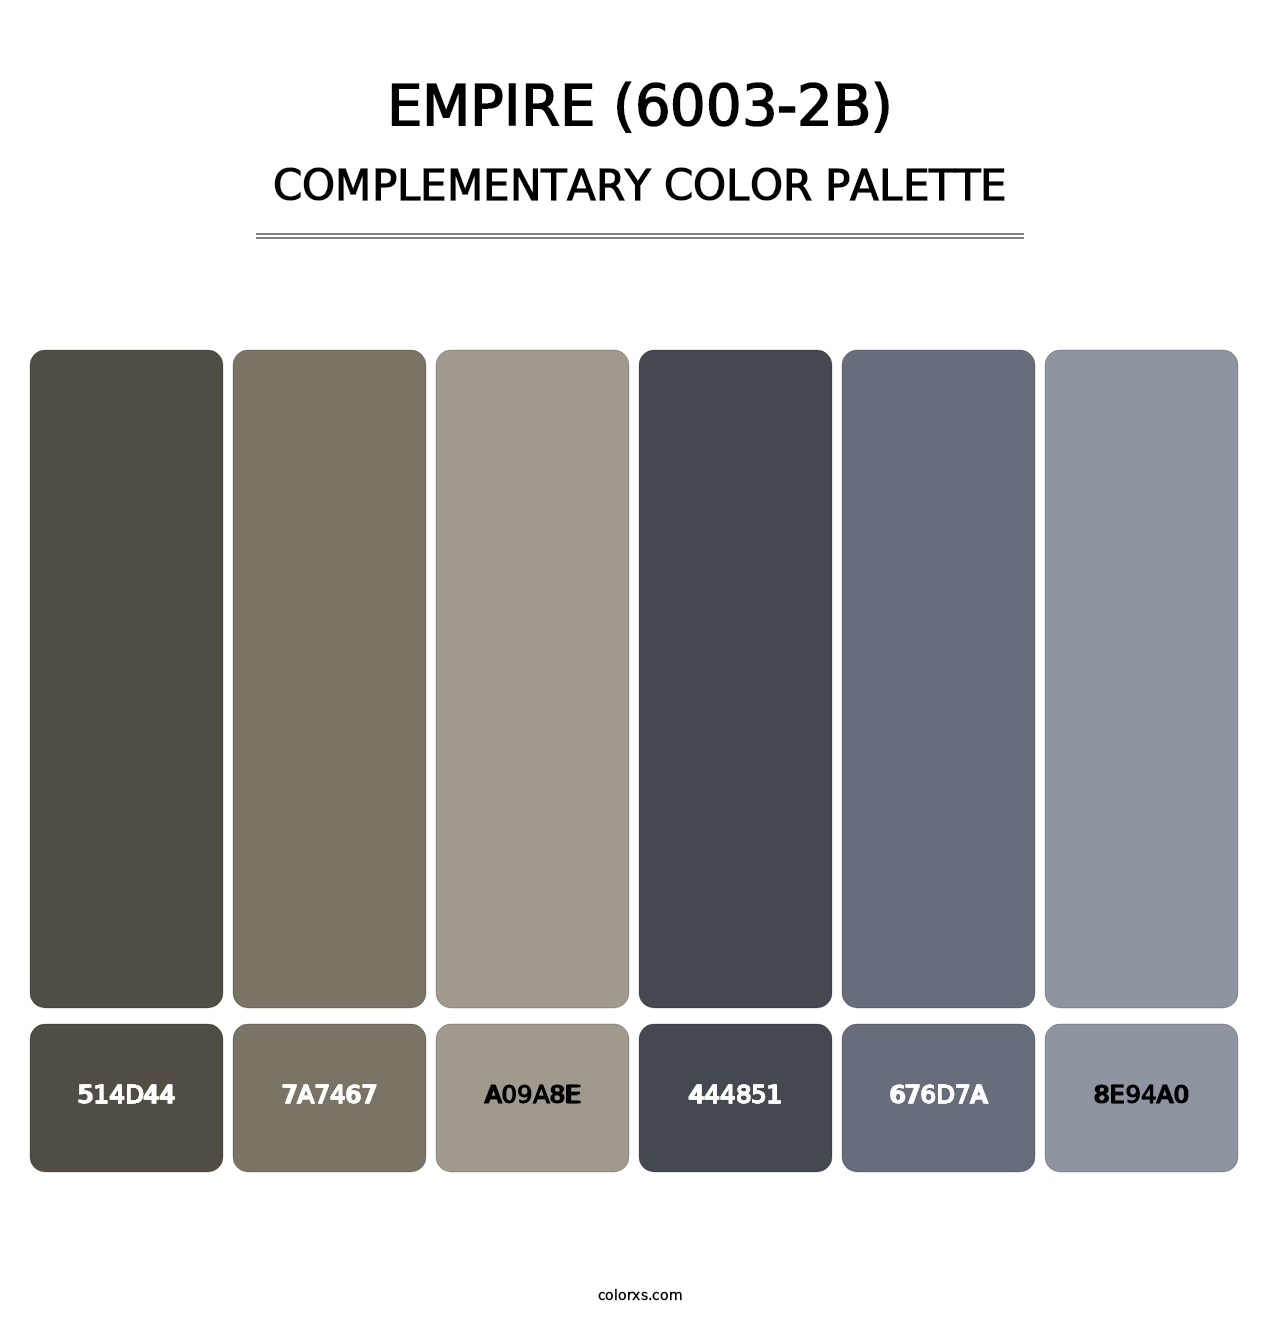 Empire (6003-2B) - Complementary Color Palette